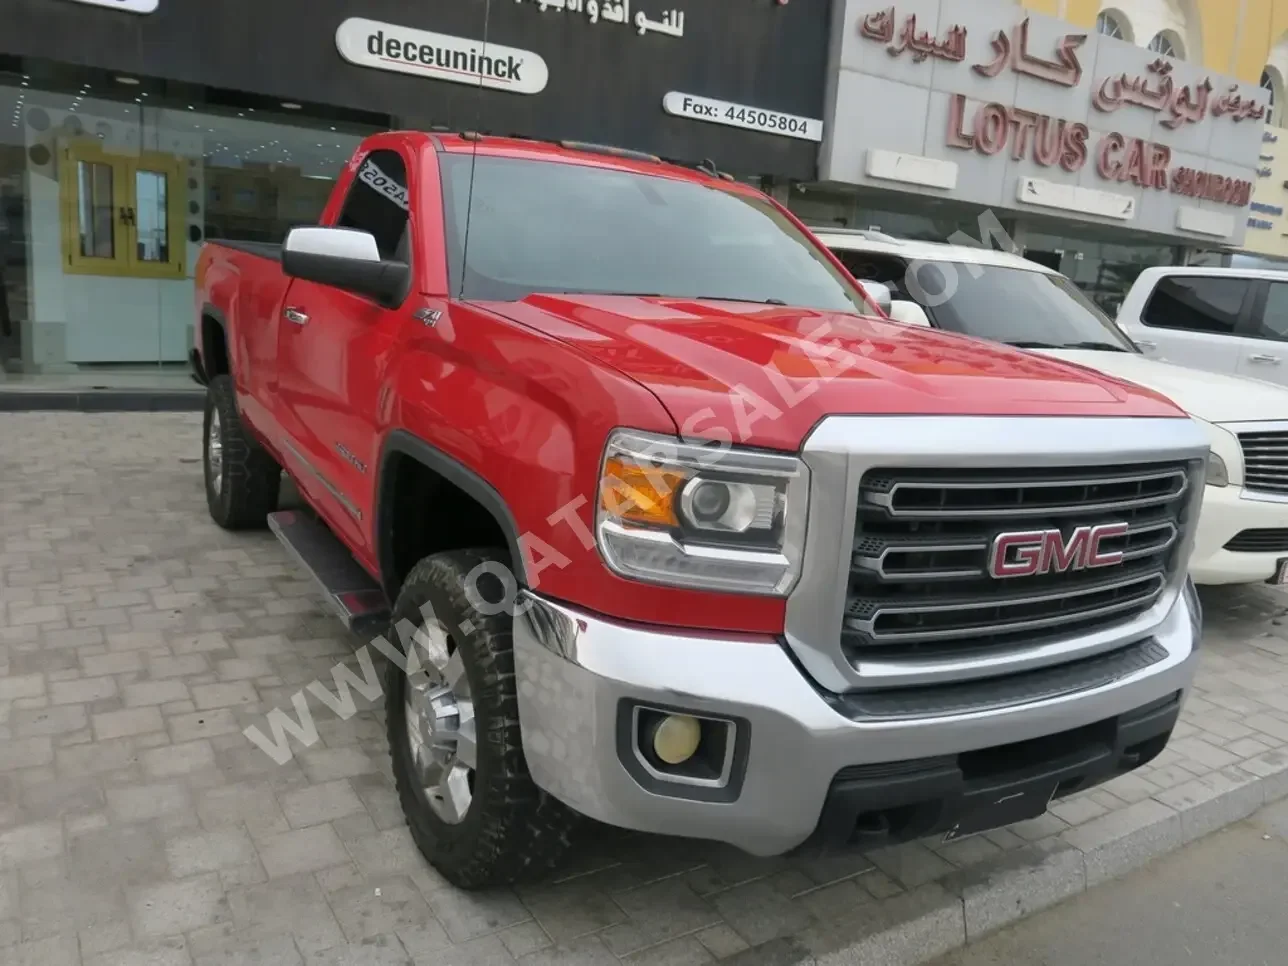 GMC  Sierra  2500 HD  2018  Automatic  135,000 Km  8 Cylinder  Four Wheel Drive (4WD)  Pick Up  Red